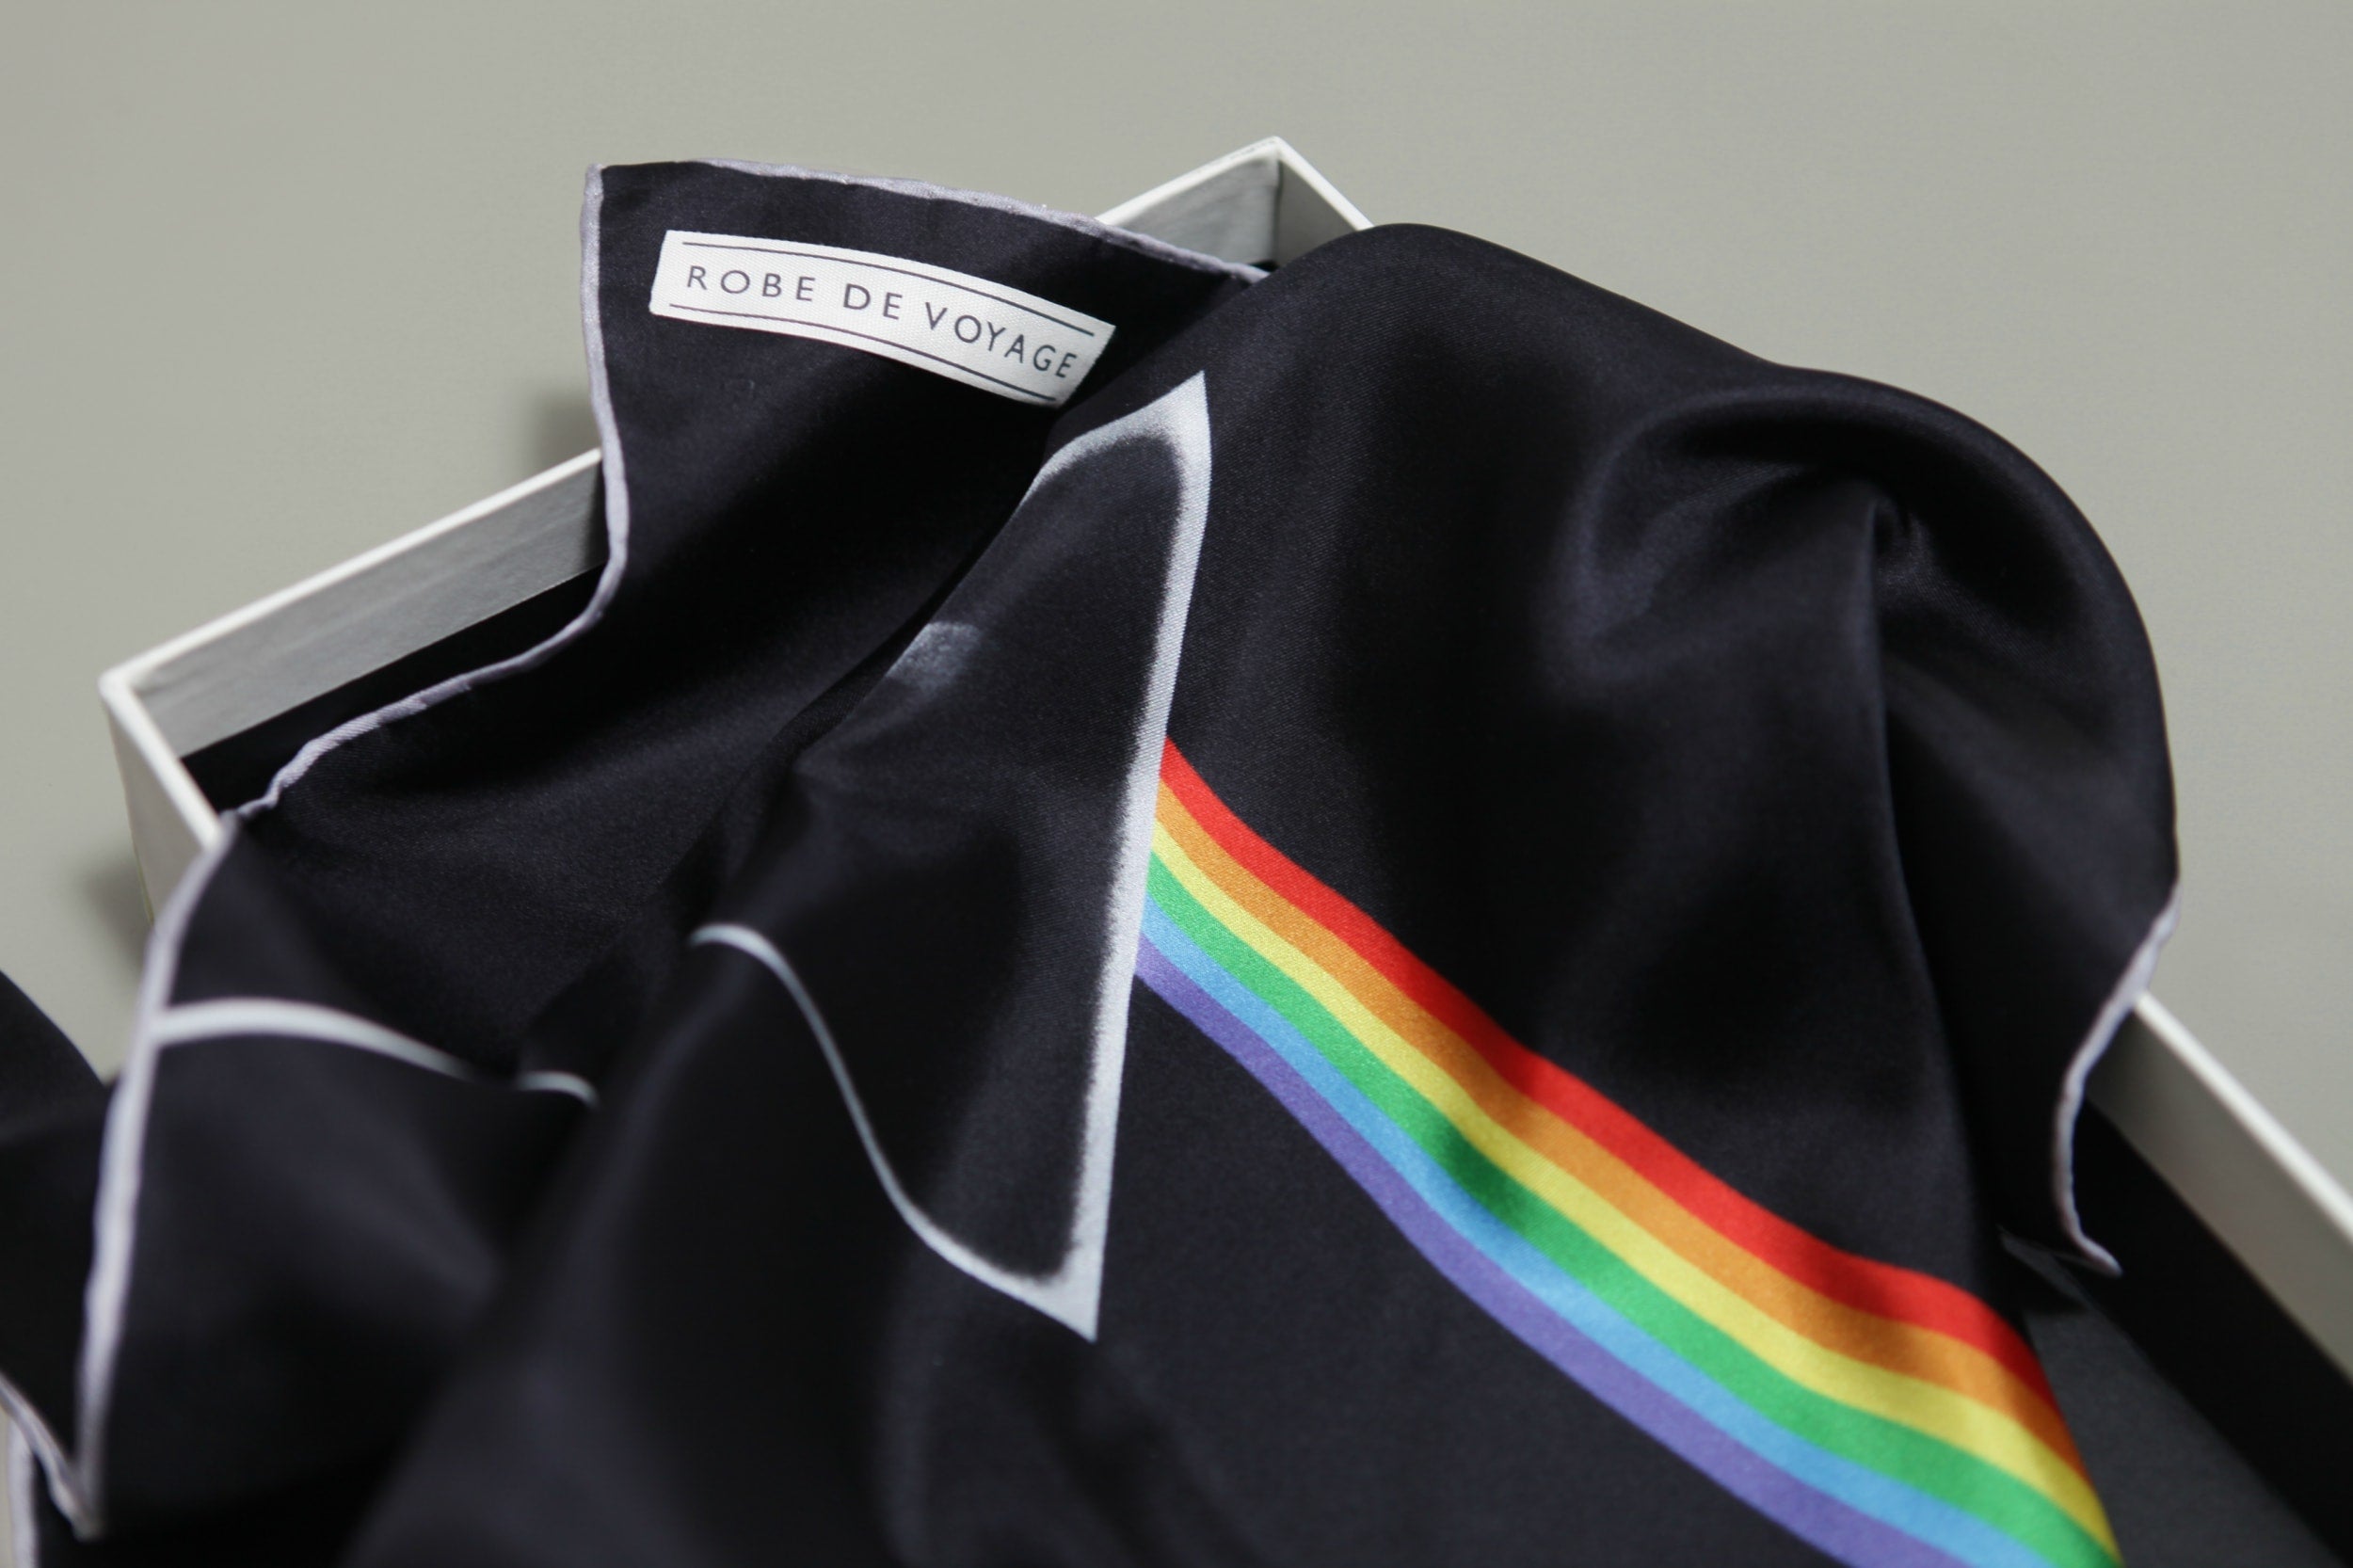 Limited edition set of three iconic Pink Floyd album covers, printed by sustainable, luxury, fashion brand Robe de Voyage, for Pink Floyd's Mortal Remains exhibition. Dark side of the moon.